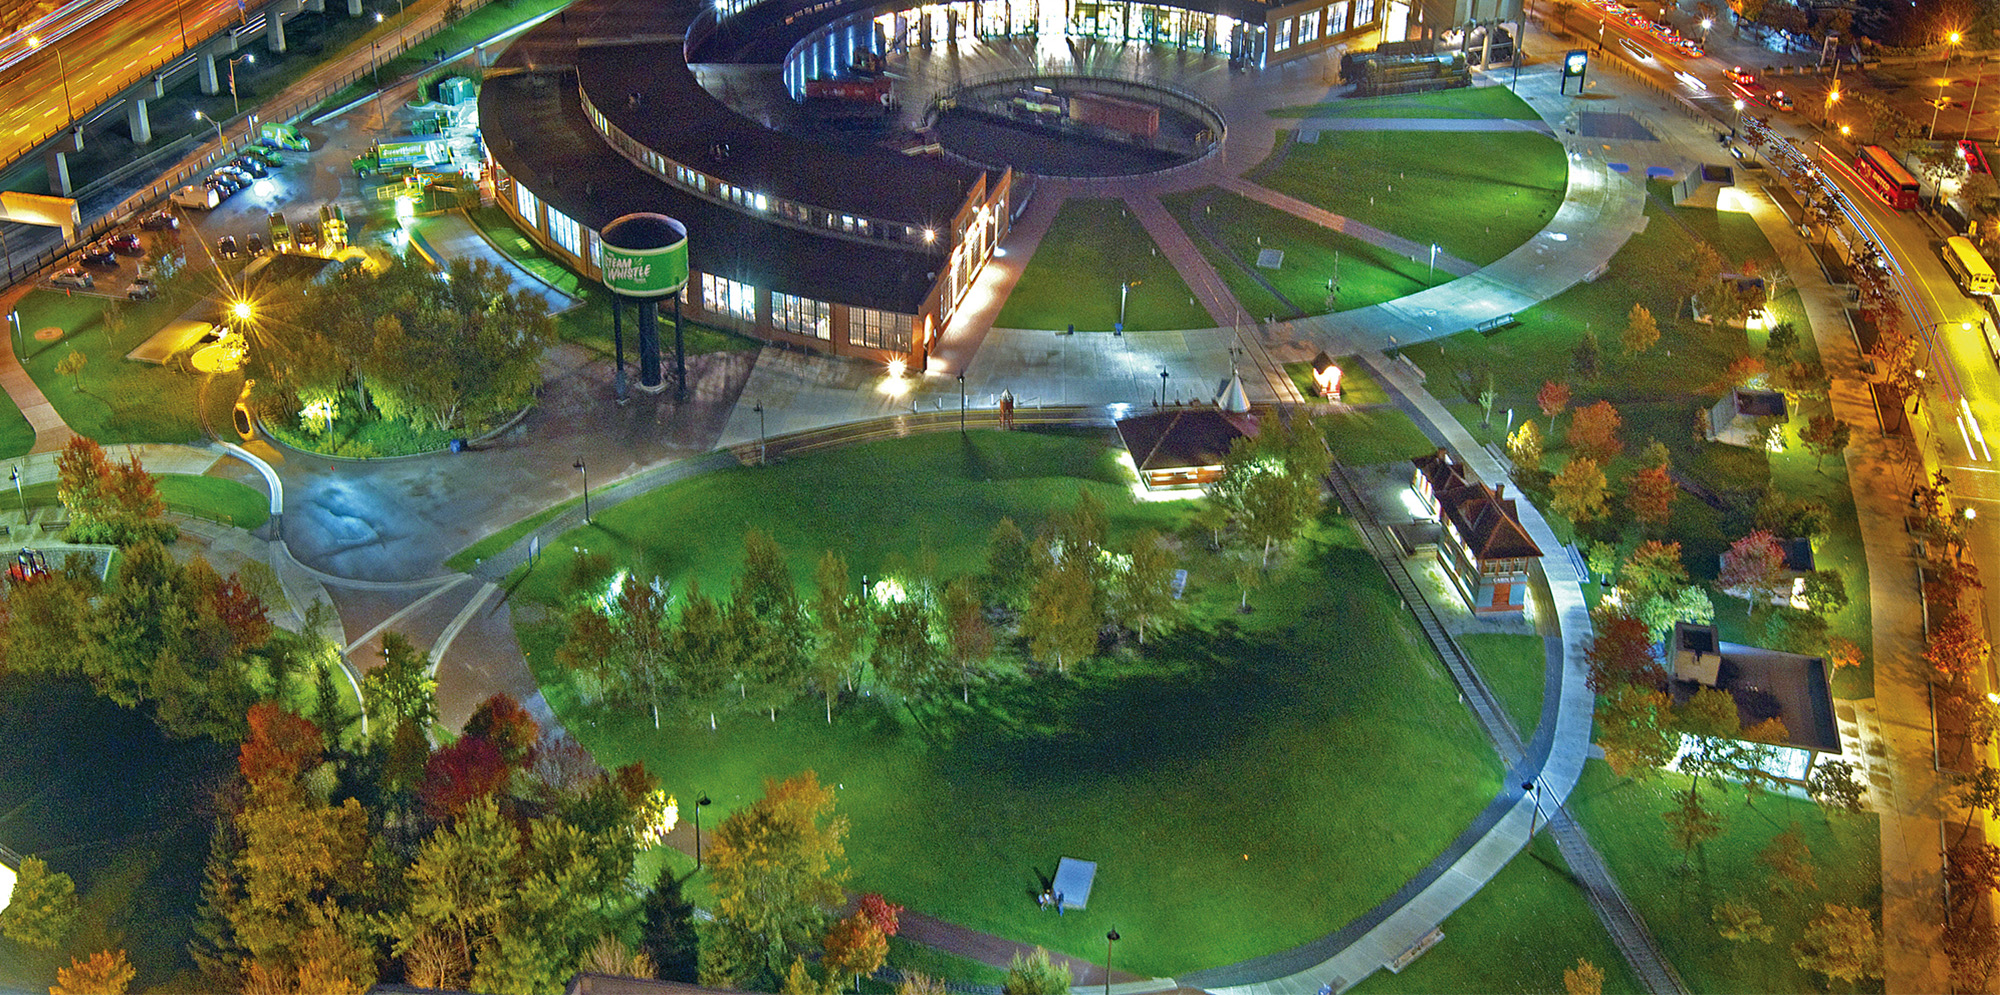 Roundhouse Park aerial view